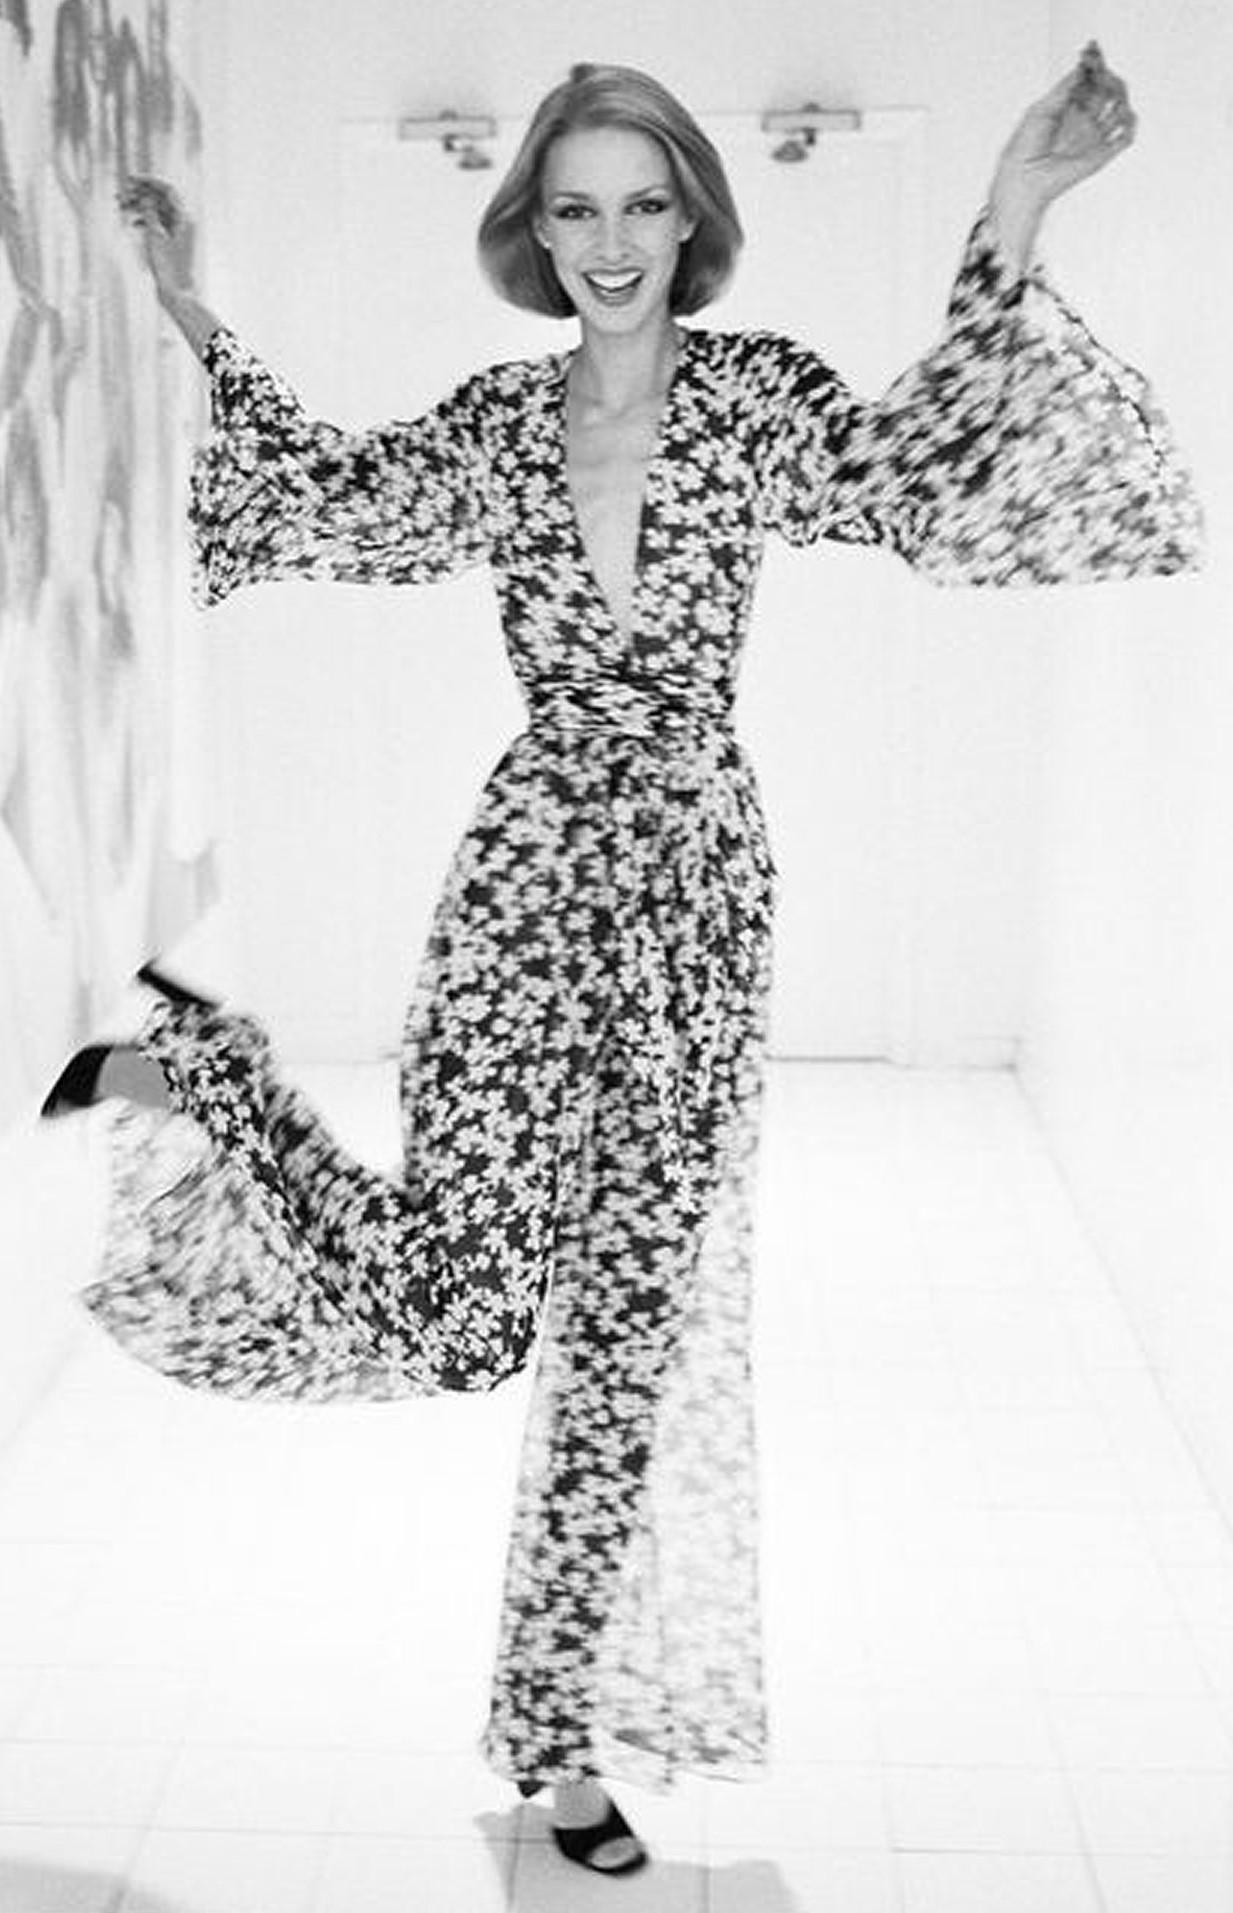 Gorgeous Halston Couture black and beige clover print silk chiffon jumpsuit dating back to the mid 1970's. Halston revolutionized the way women dress and is one of the few designers, alongside Claire McCardell and Norman Norell, to define what is